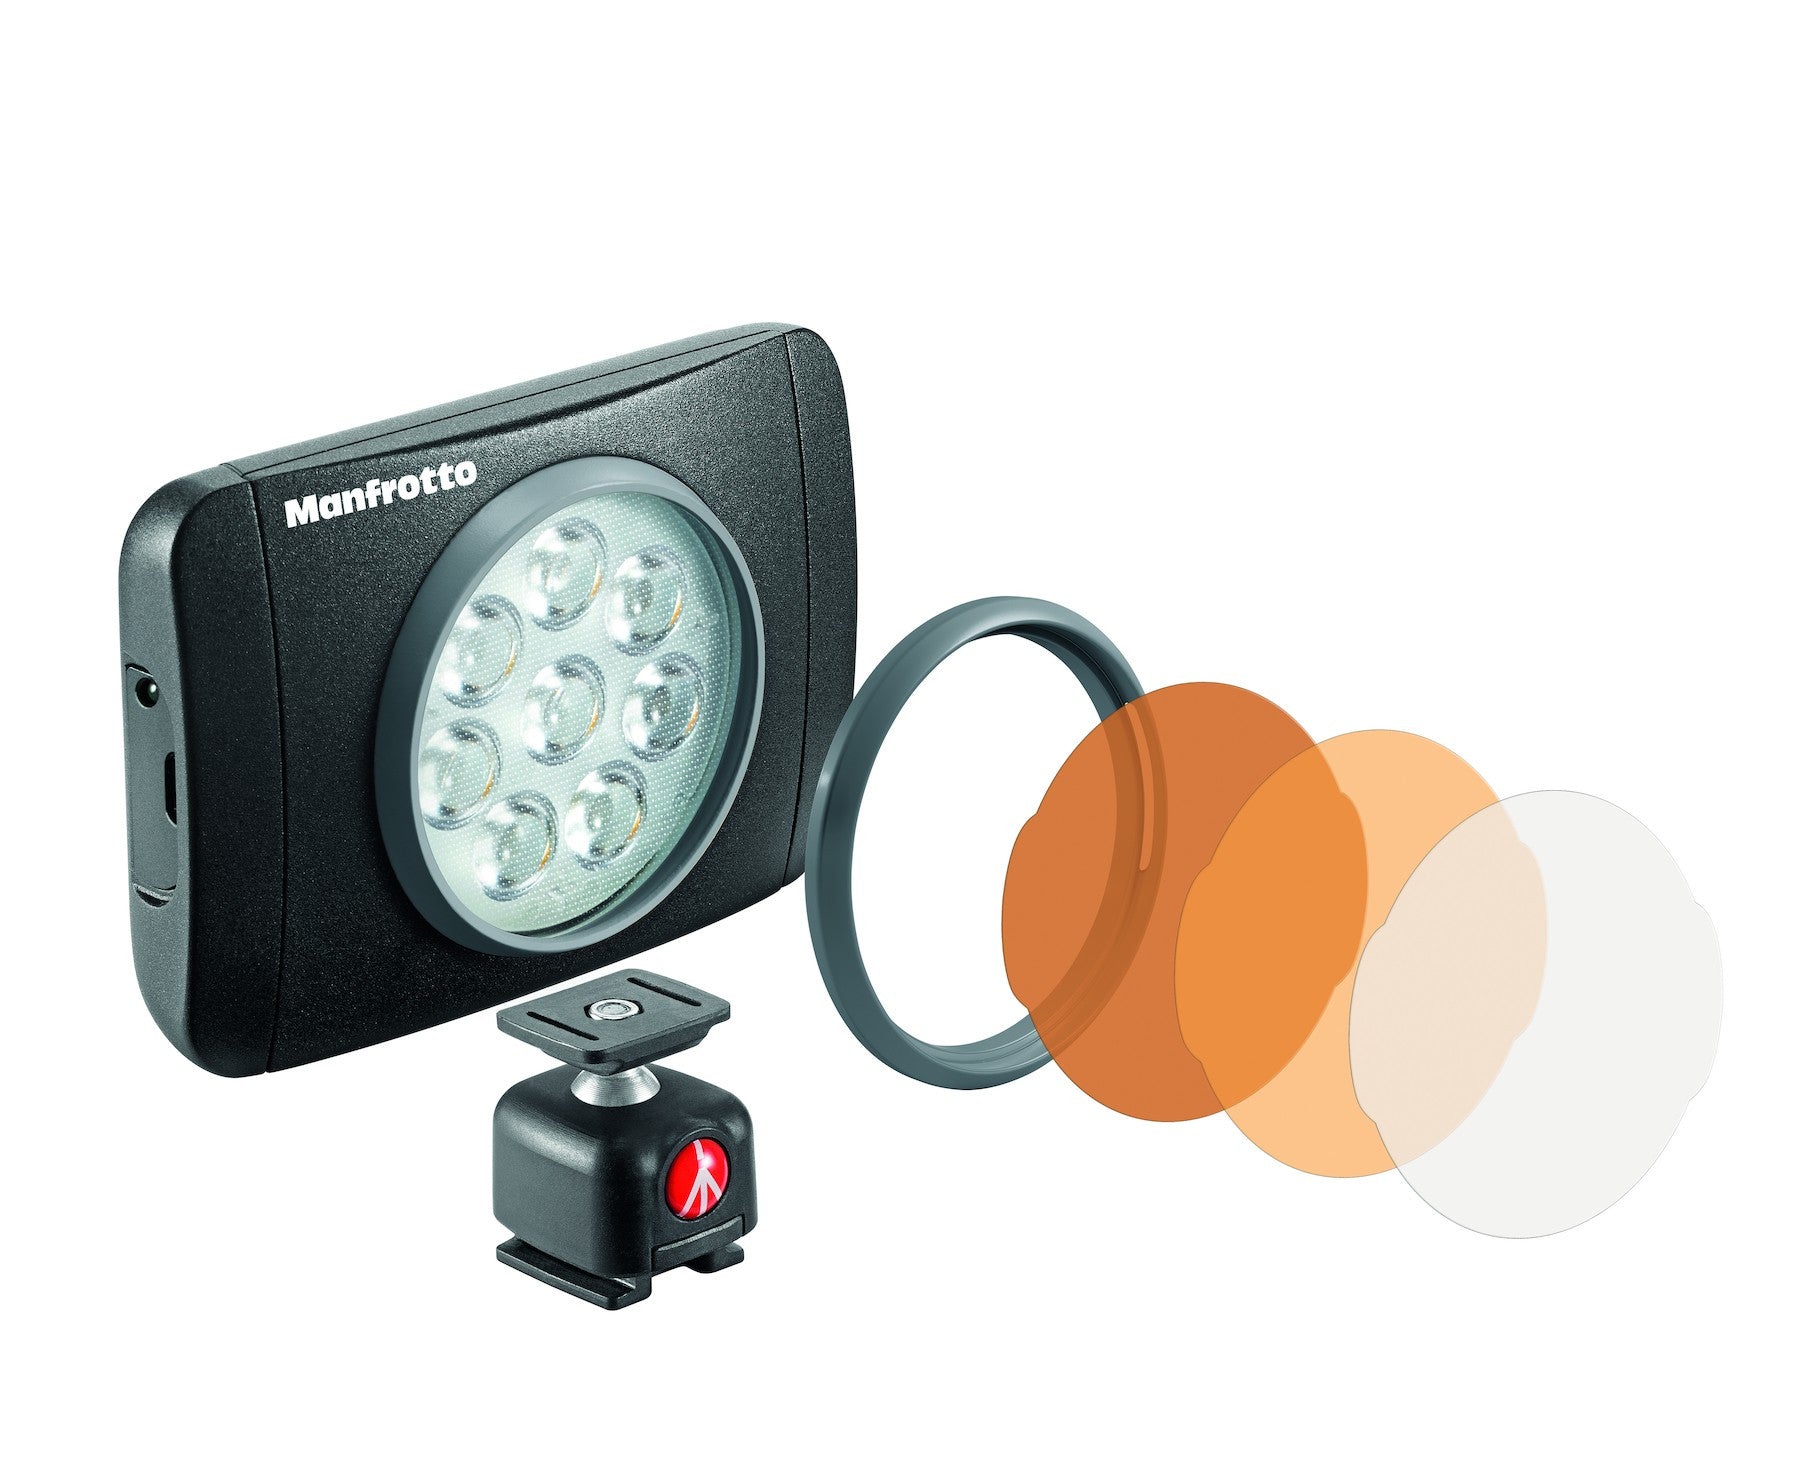 Manfrotto Lumie Series Muse LED Light, lighting led lights, Manfrotto - Pictureline  - 1